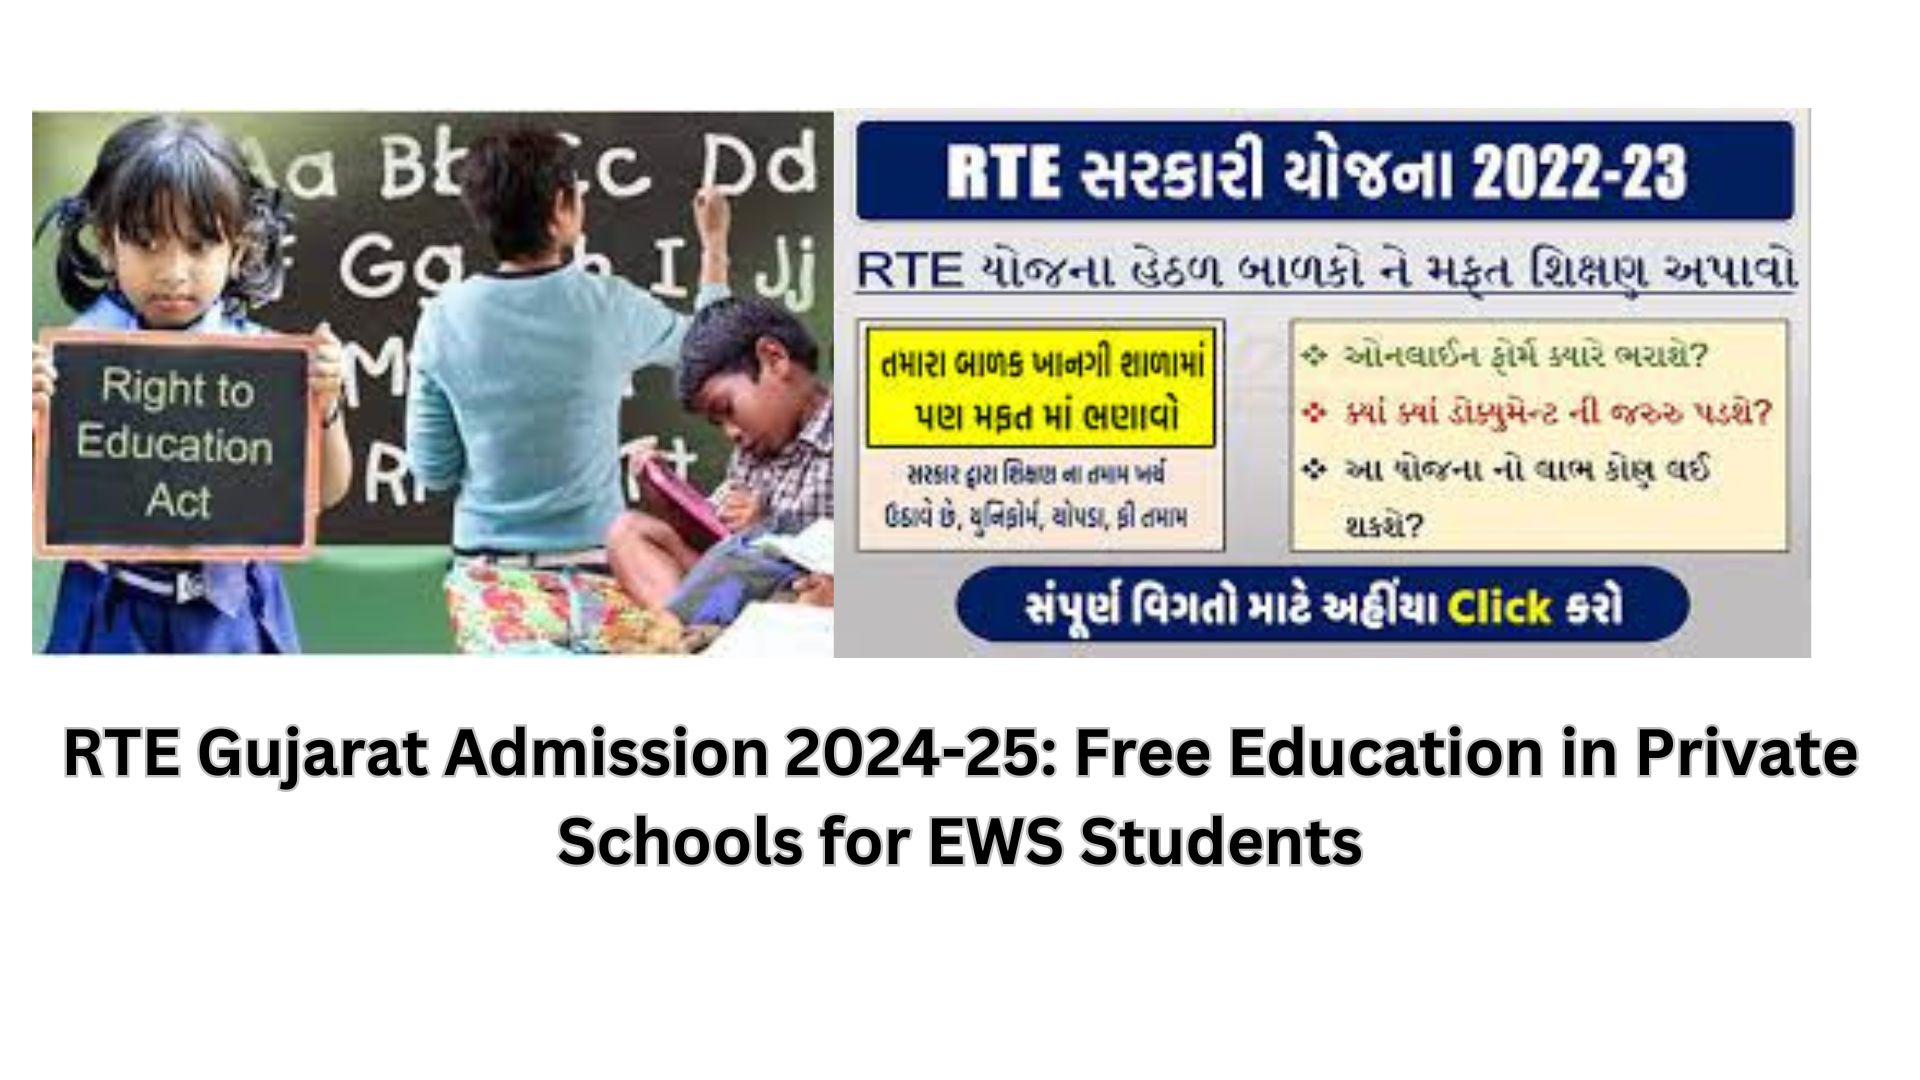 RTE Gujarat Admission 2024-25: Free Education in Private Schools for EWS Students